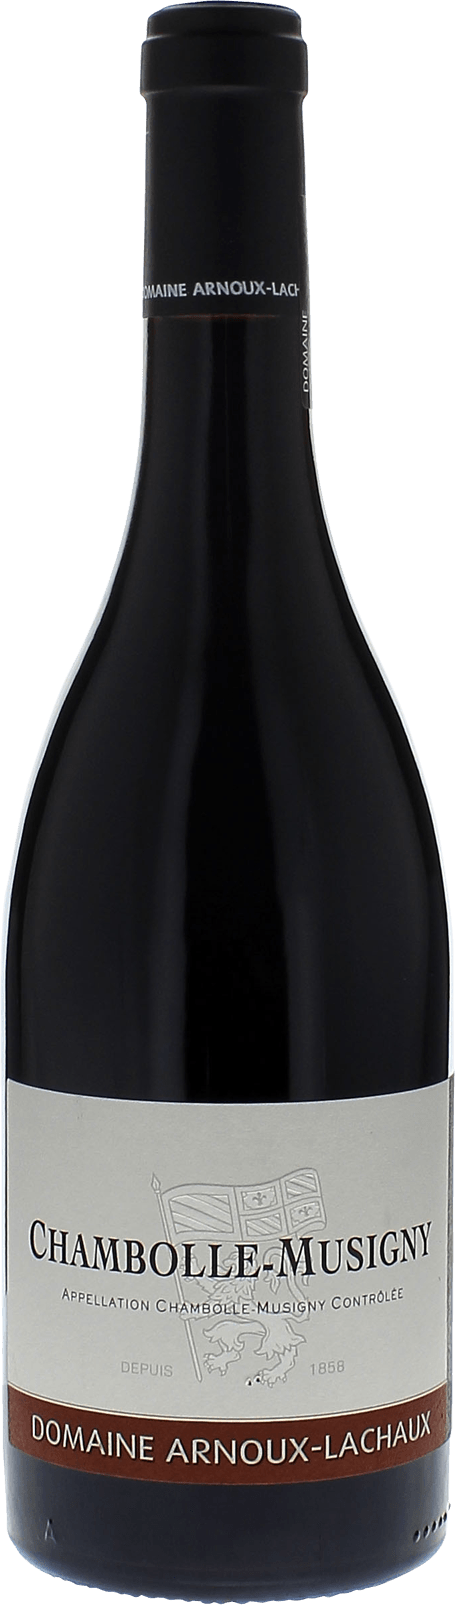 Chambolle musigny 2017 Domaine ARNOUX - LACHAUX, Bourgogne rouge